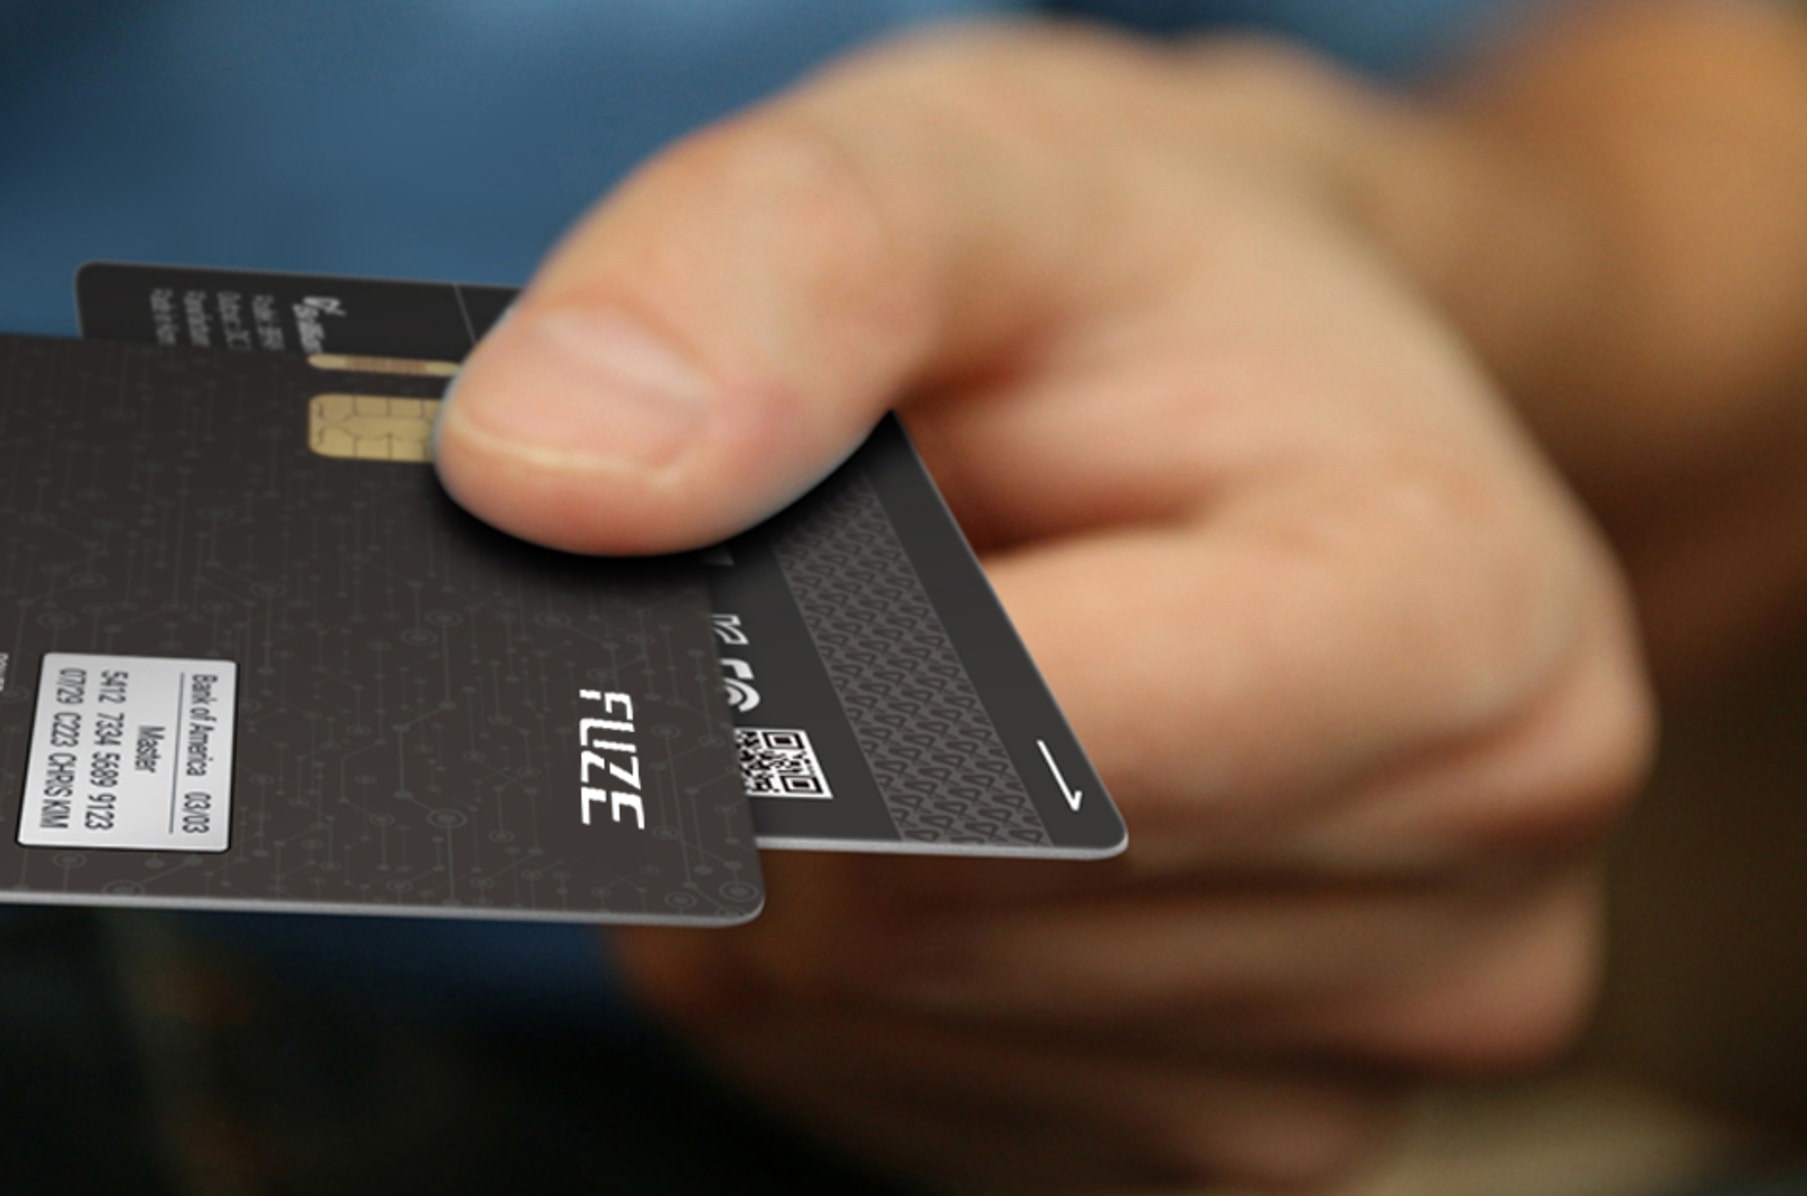 Whatever you do, don’t give this programmable payment card to your waiter | Ars Technica